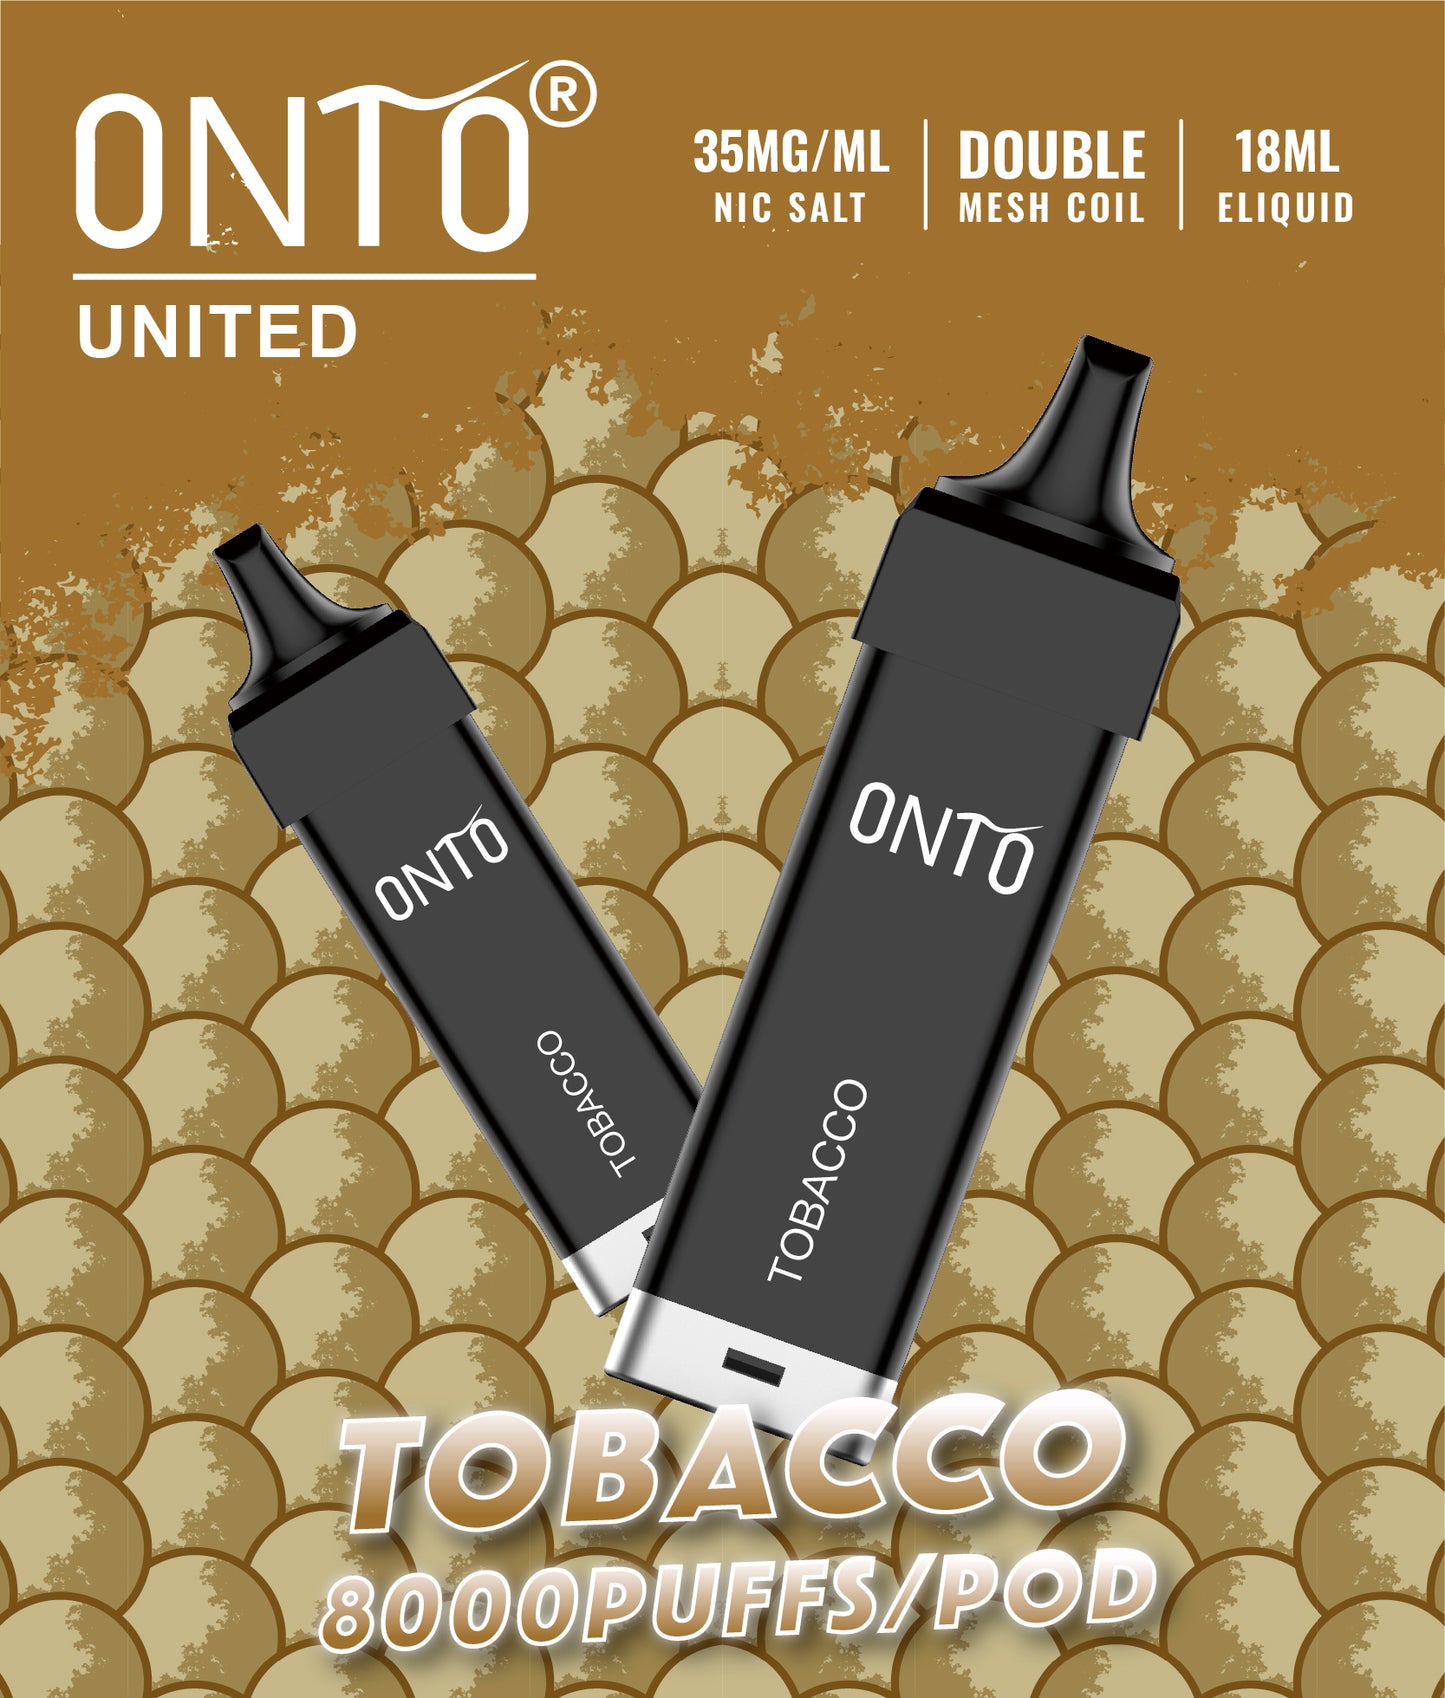 ONTO United Pre-filled Pods- 8000 puffs